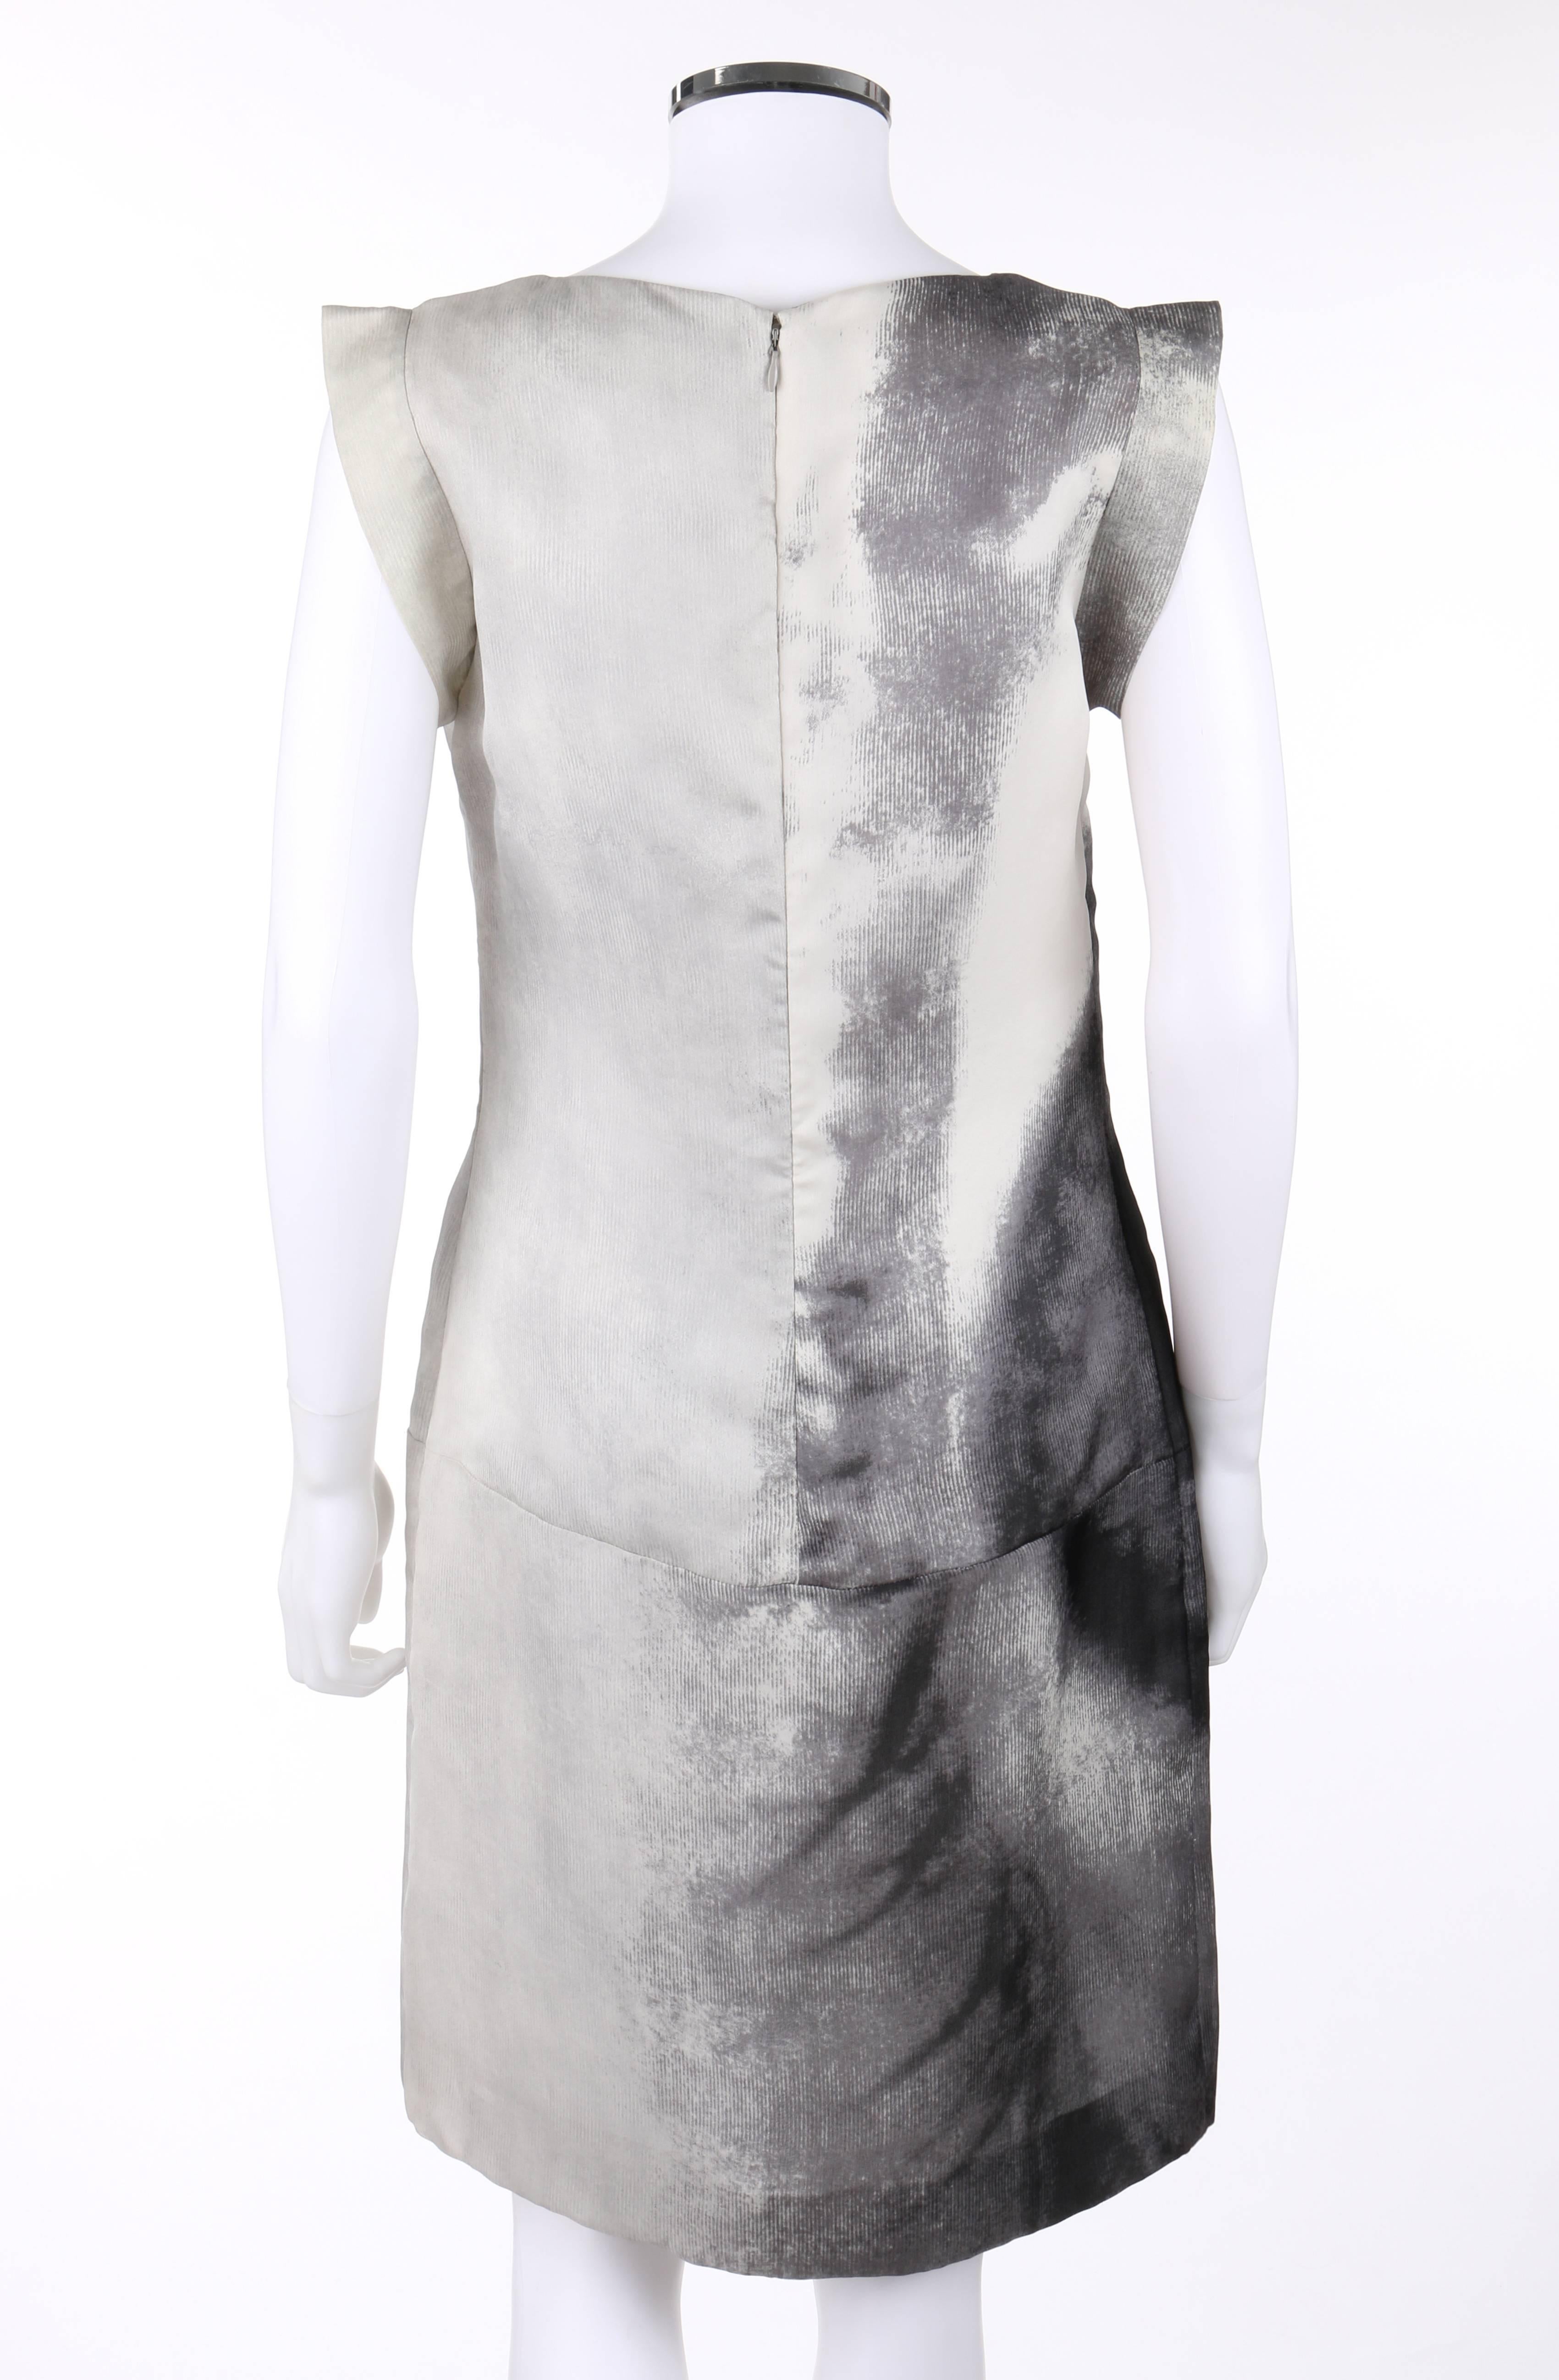 GIVENCHY Couture S/S 1999 ALEXANDER McQUEEN Black White Abstract Eye ...